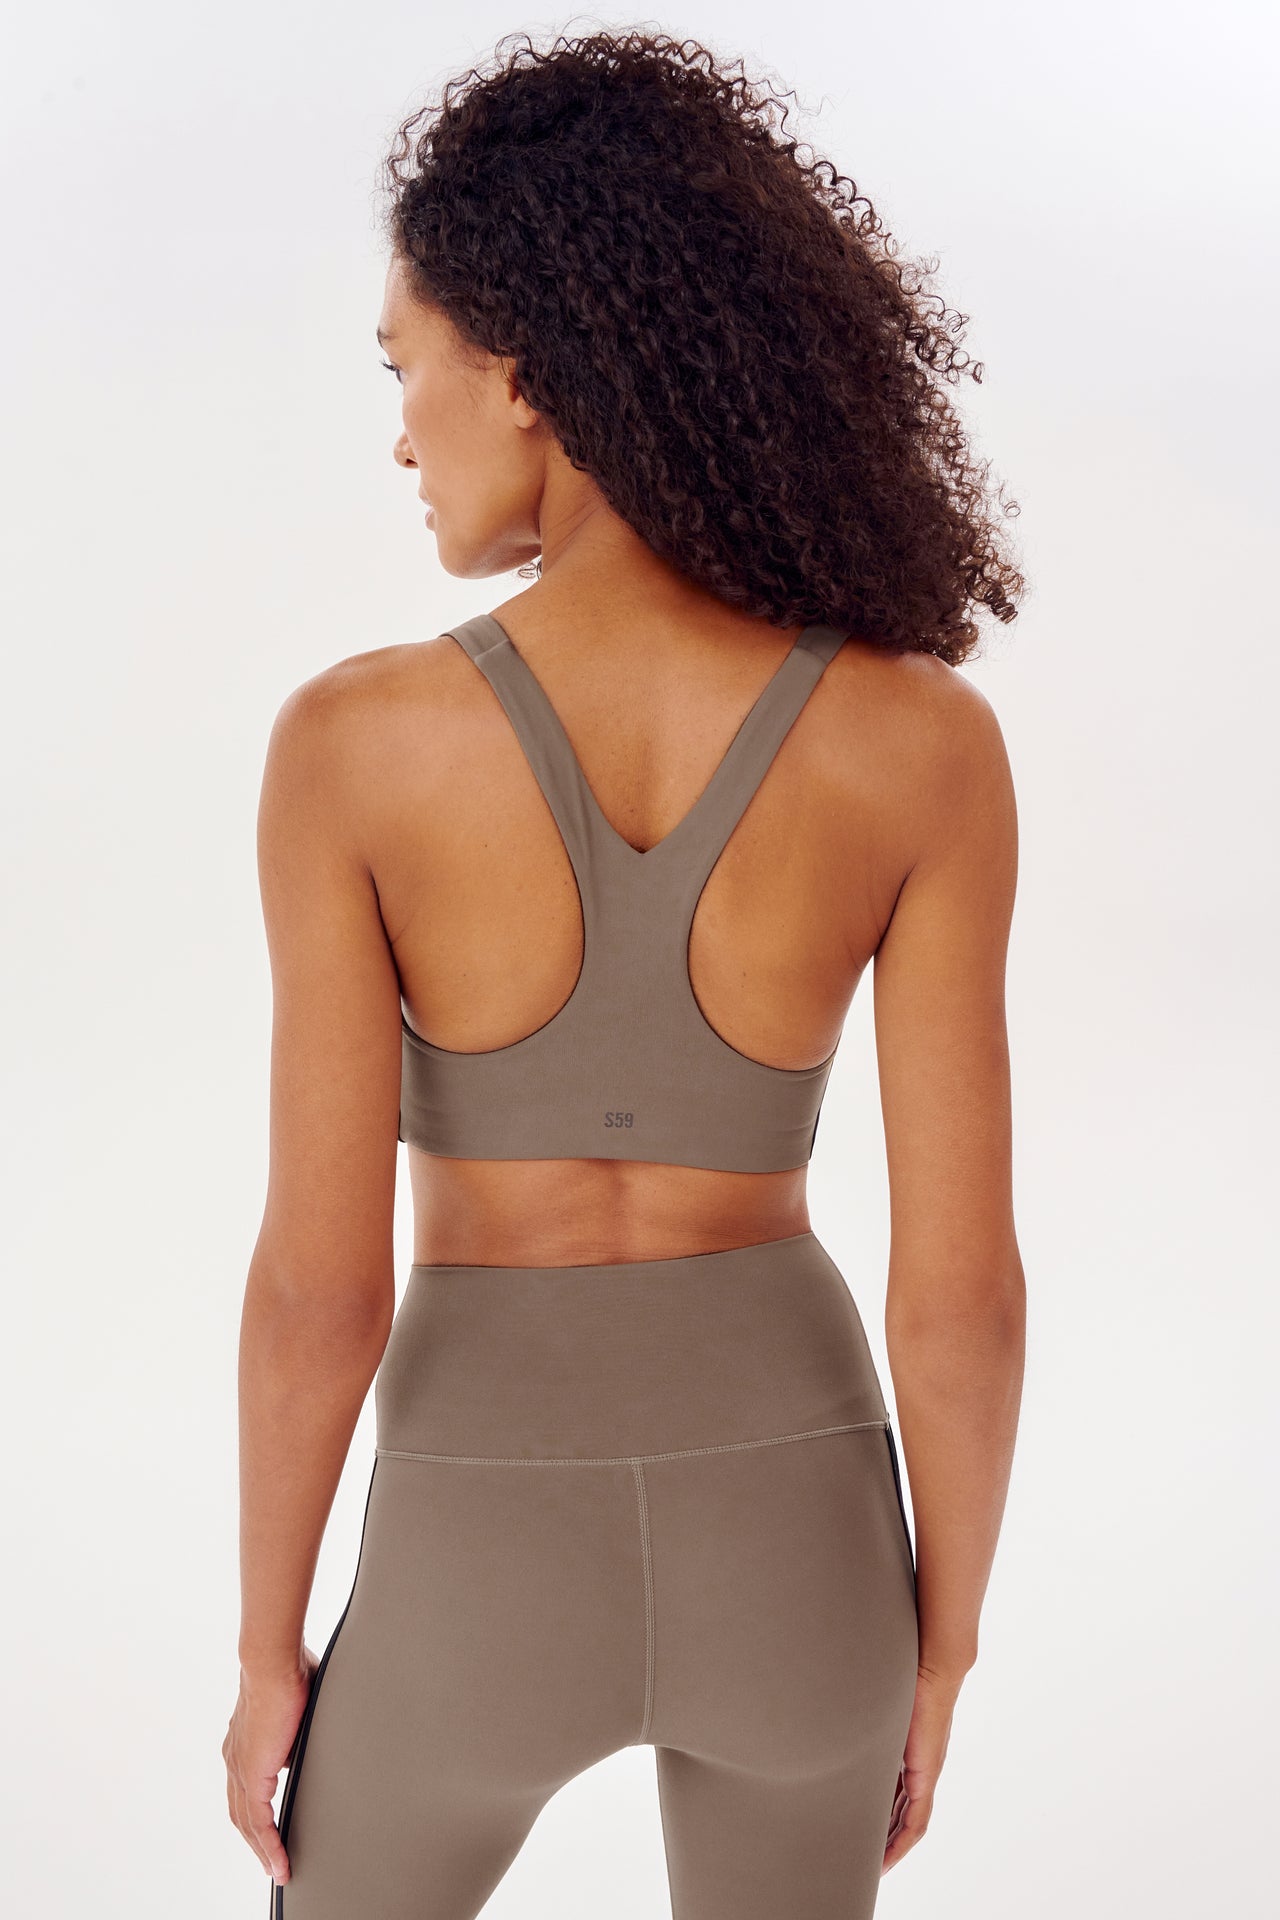 The back view of a woman wearing a grey racer back bra from the SPLITS59 Ella Airweight Bra - Lentil/Black collection.